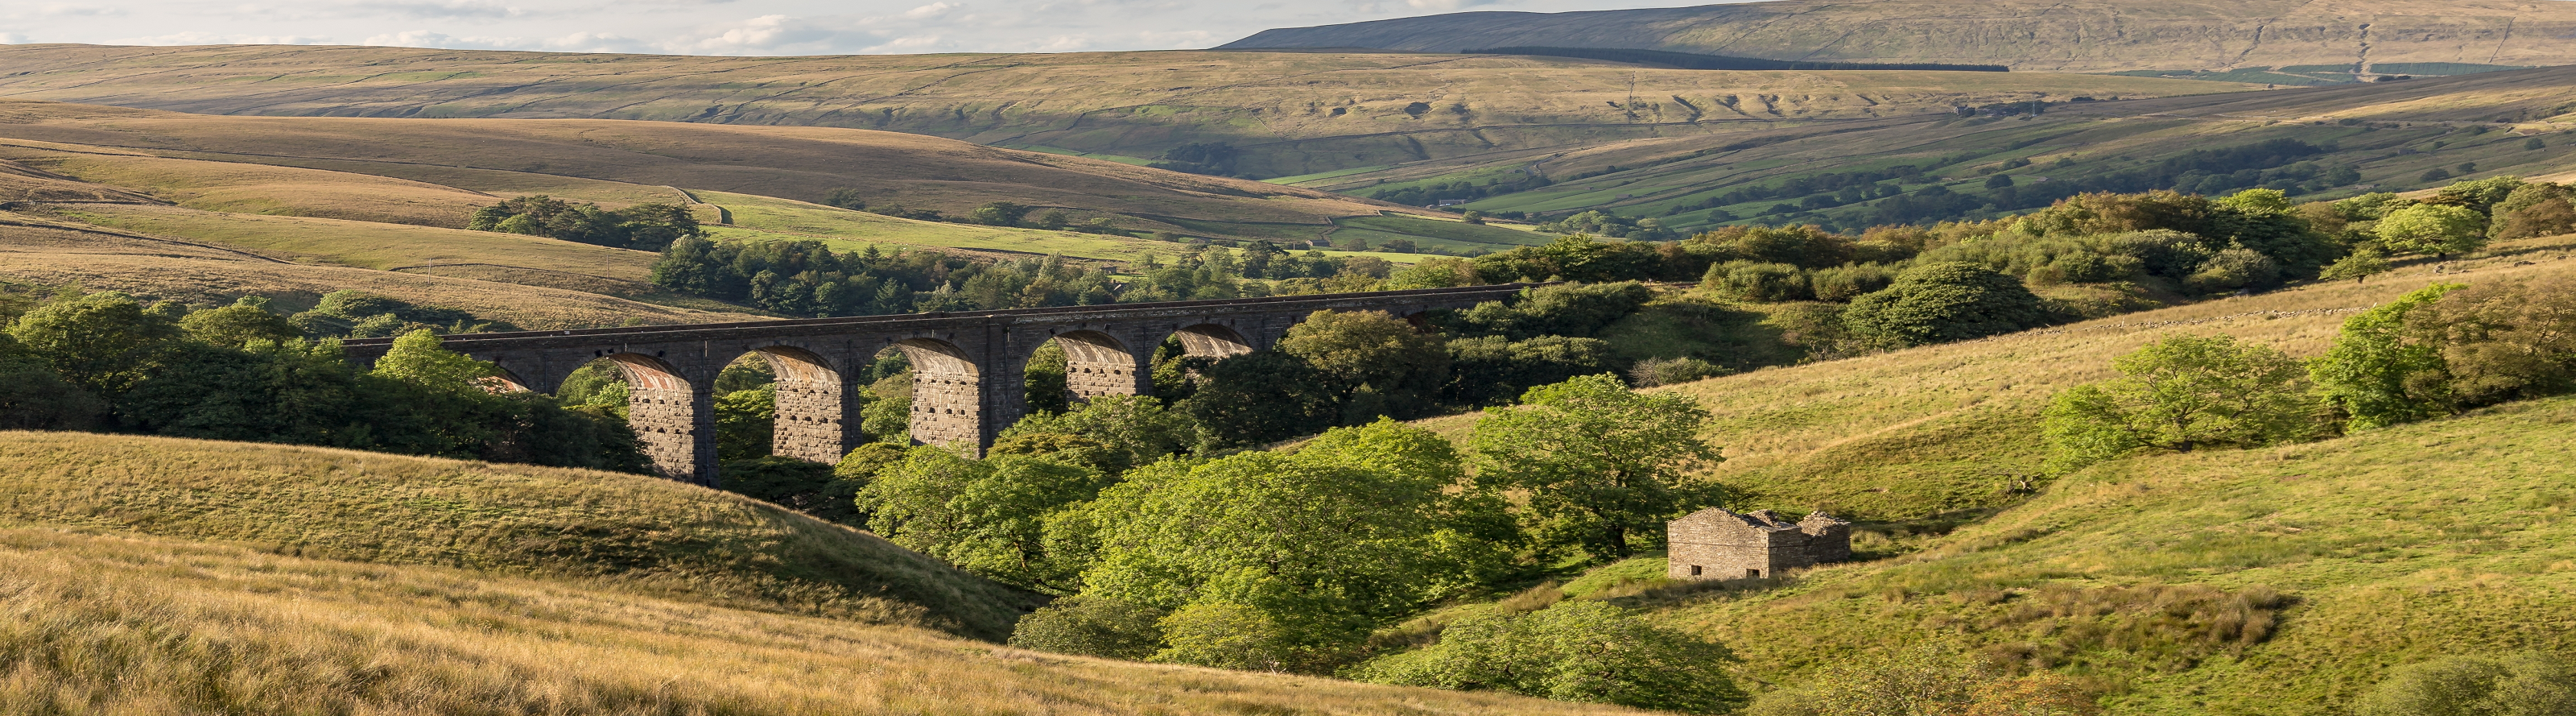 An image of ribblehead in the Yorkshire Dales